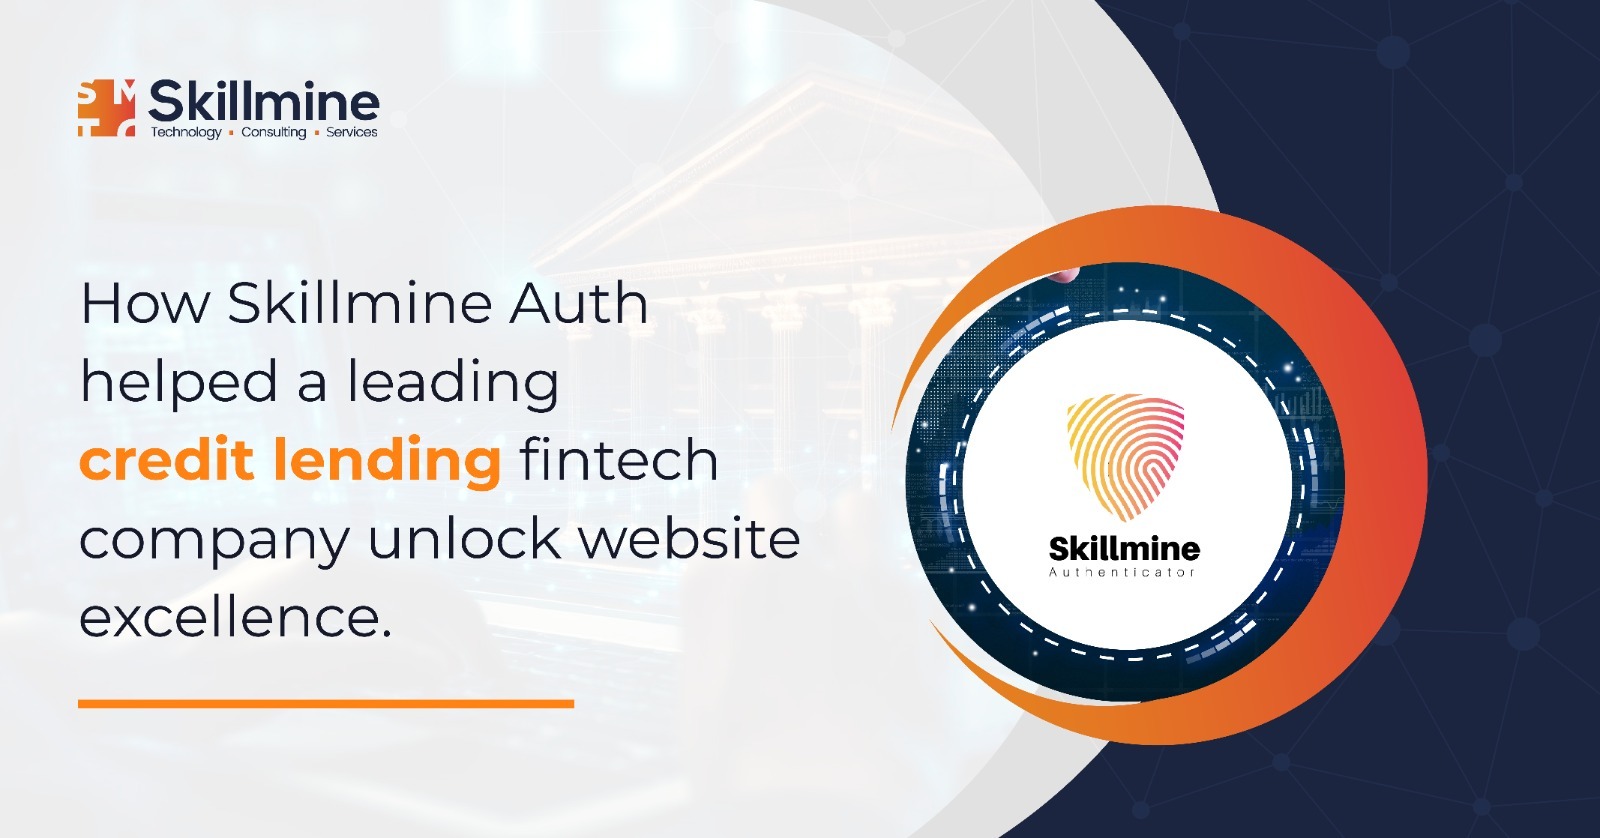 How Skillmine Auth helped a leading credit lending fintech company unlock website excellence